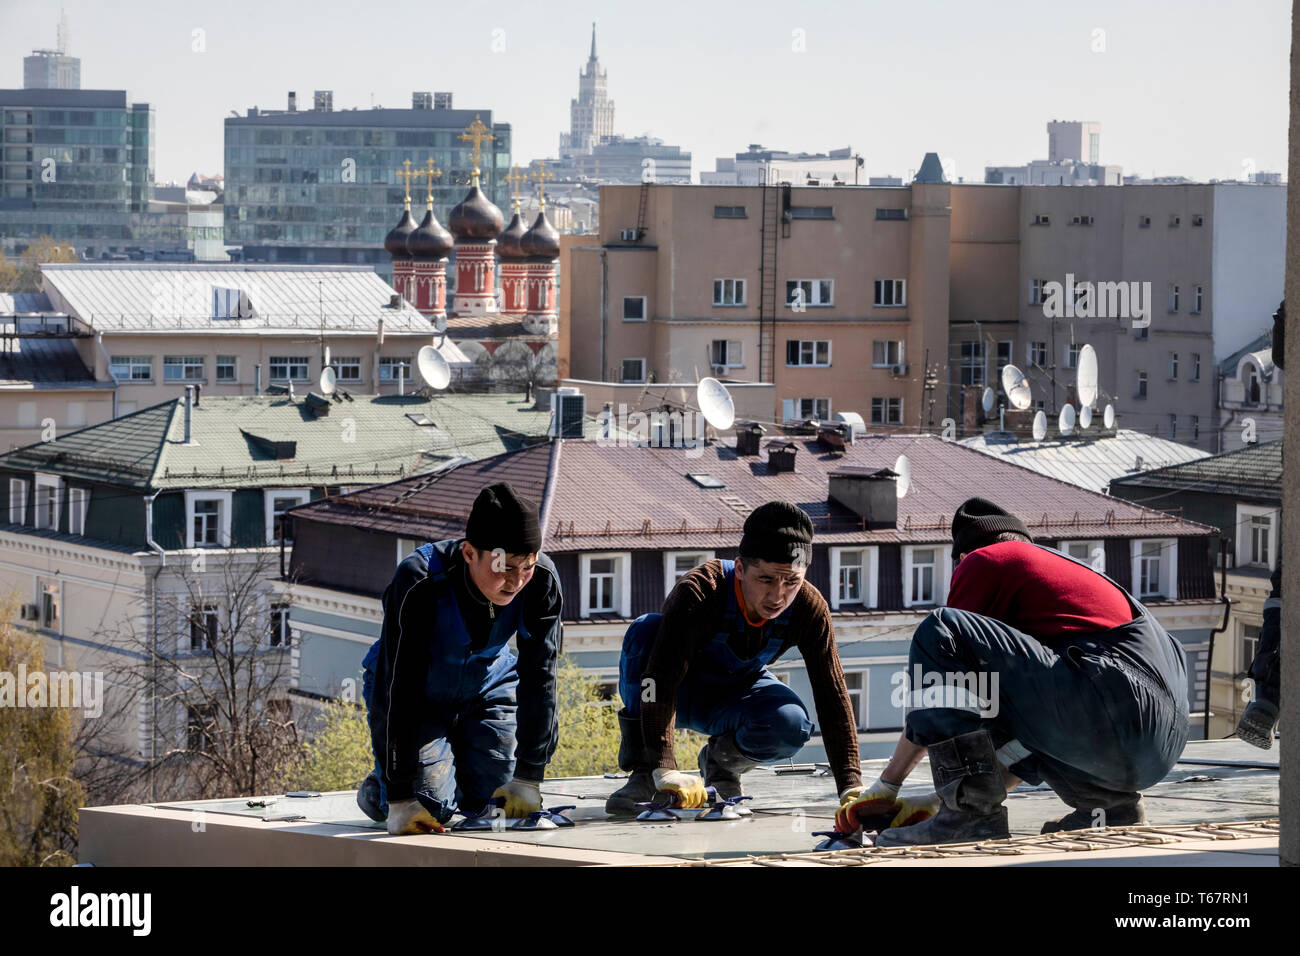 Workers from the republics of Central Asia repair the roof on an office building in the center of Moscow, Russia Stock Photo